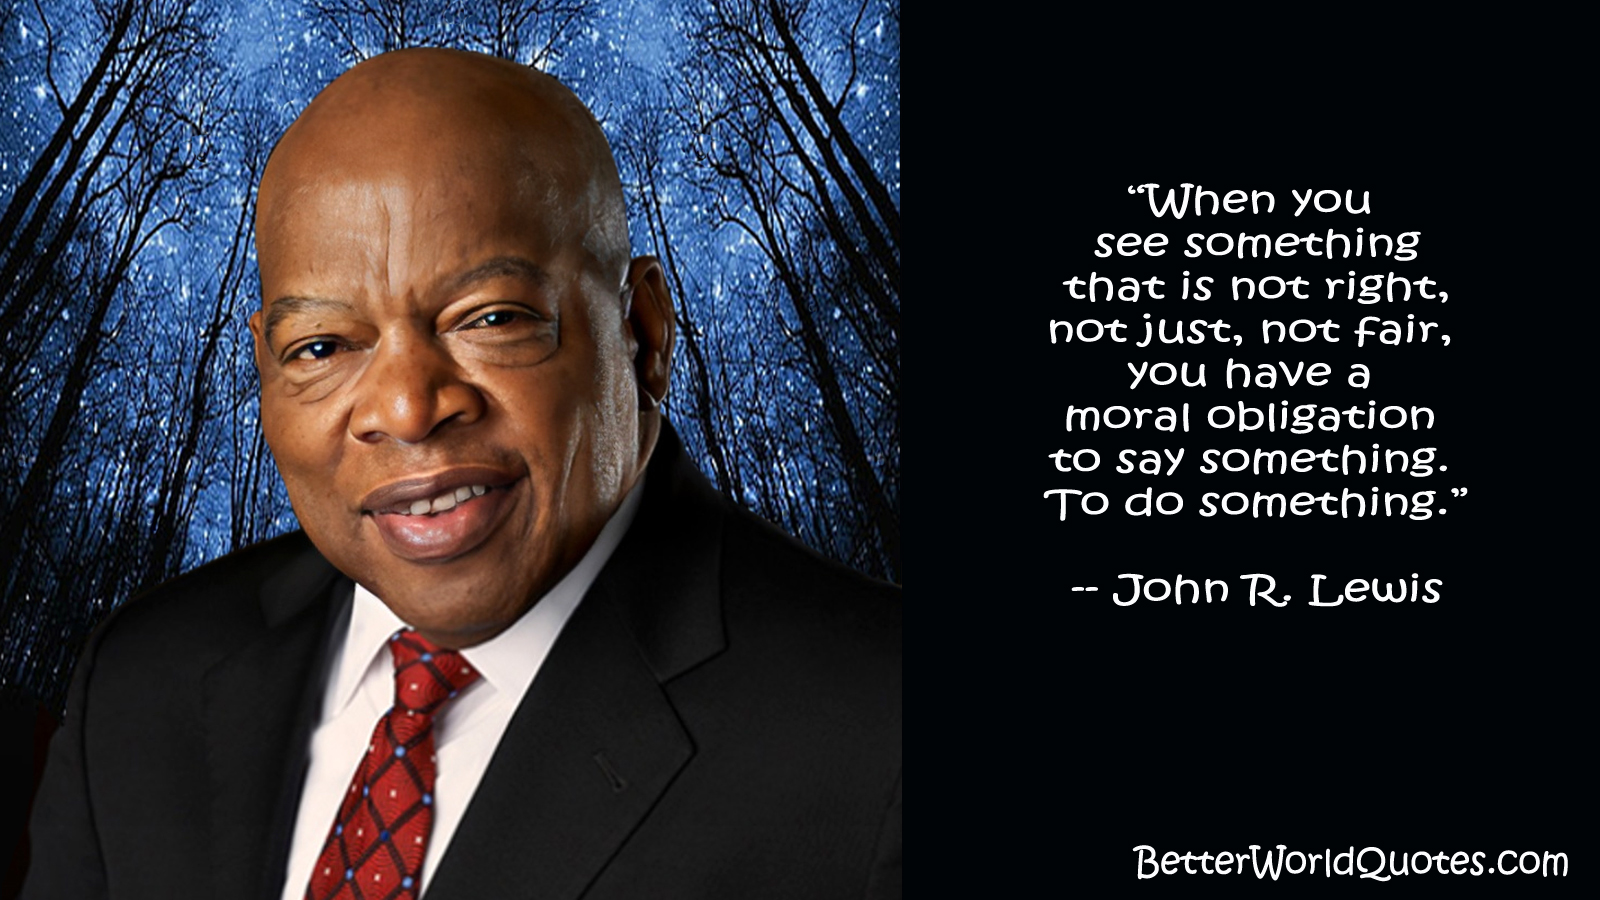 John R. Lewis: When you see something that is not right, not just, not fair, you have a moral obligation to say something. To do something.